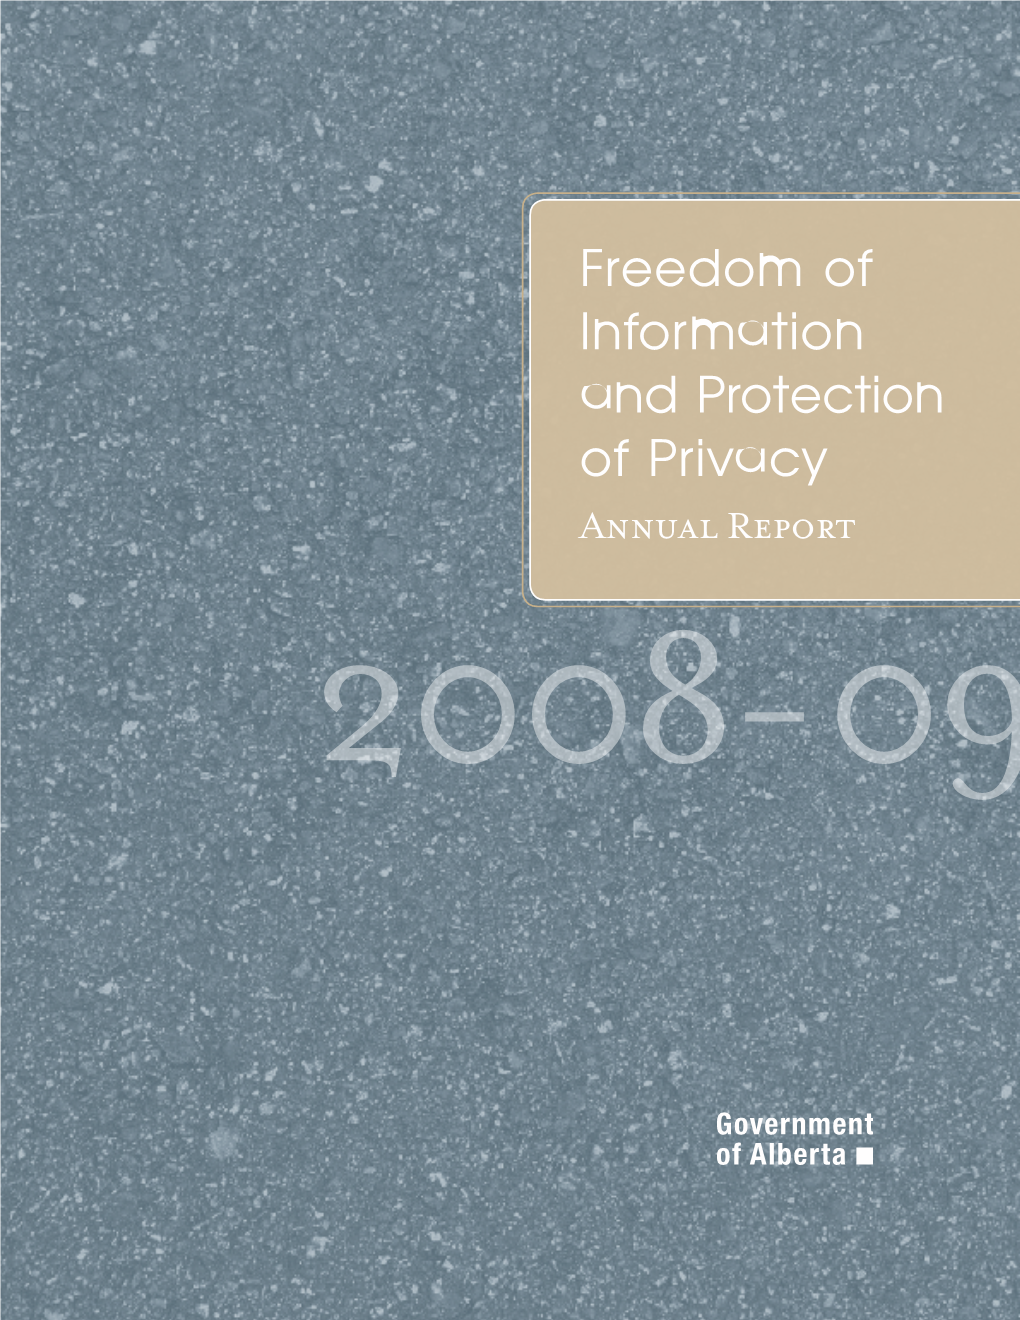 Freedom of Information and Protection of Privacy Annual Report 2008-2009